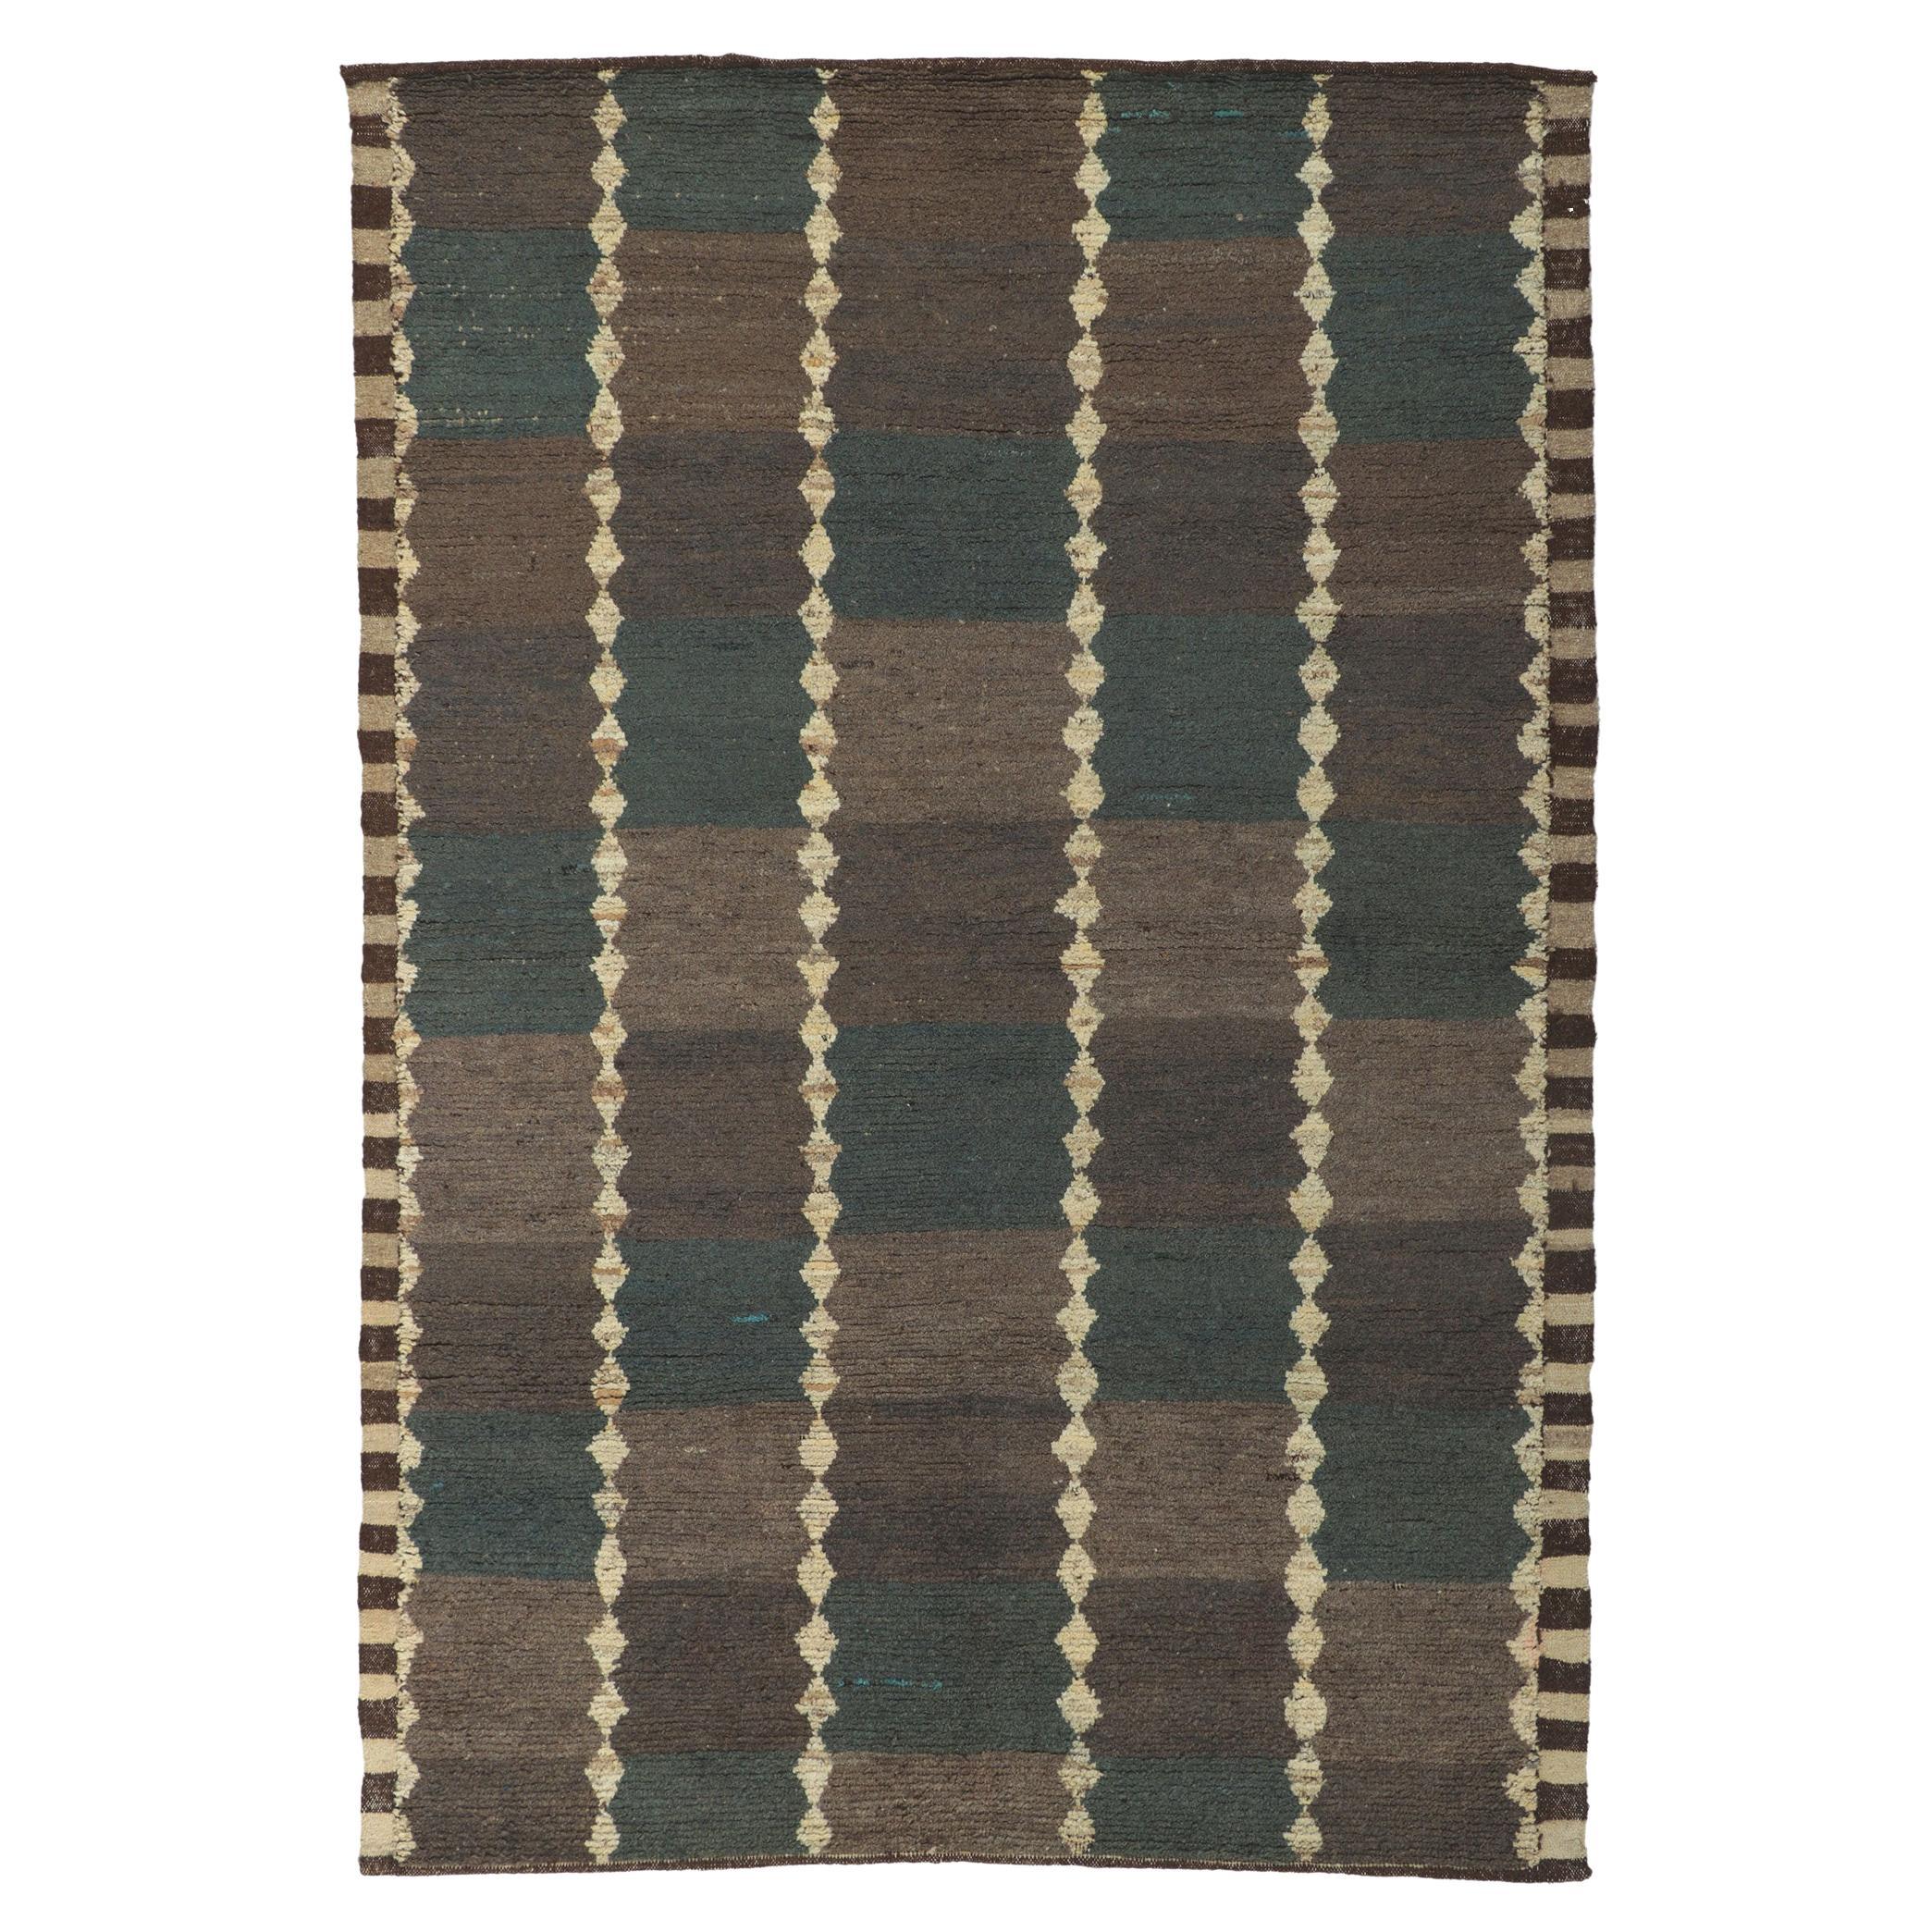 Earth-tone Checkered Moroccan Rug, Masculine Appeal Meets Midcentury Modern